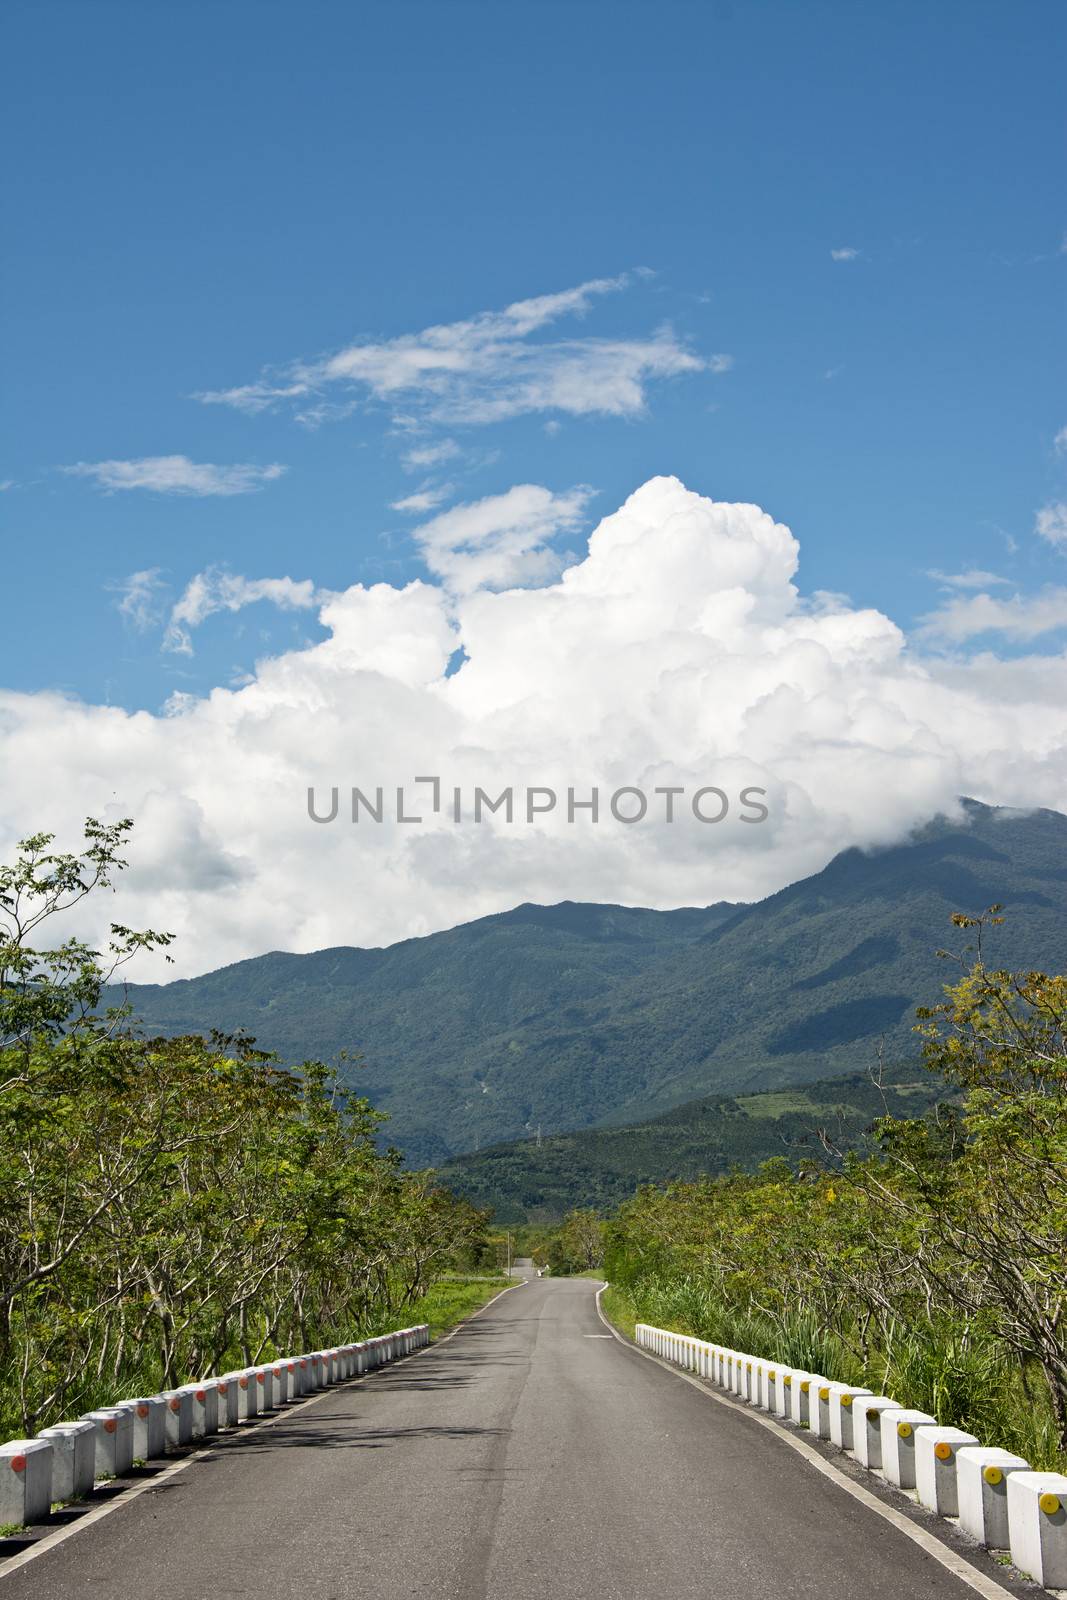 Rural landscape with road in daytime, Hualien, Taiwan, Asia.